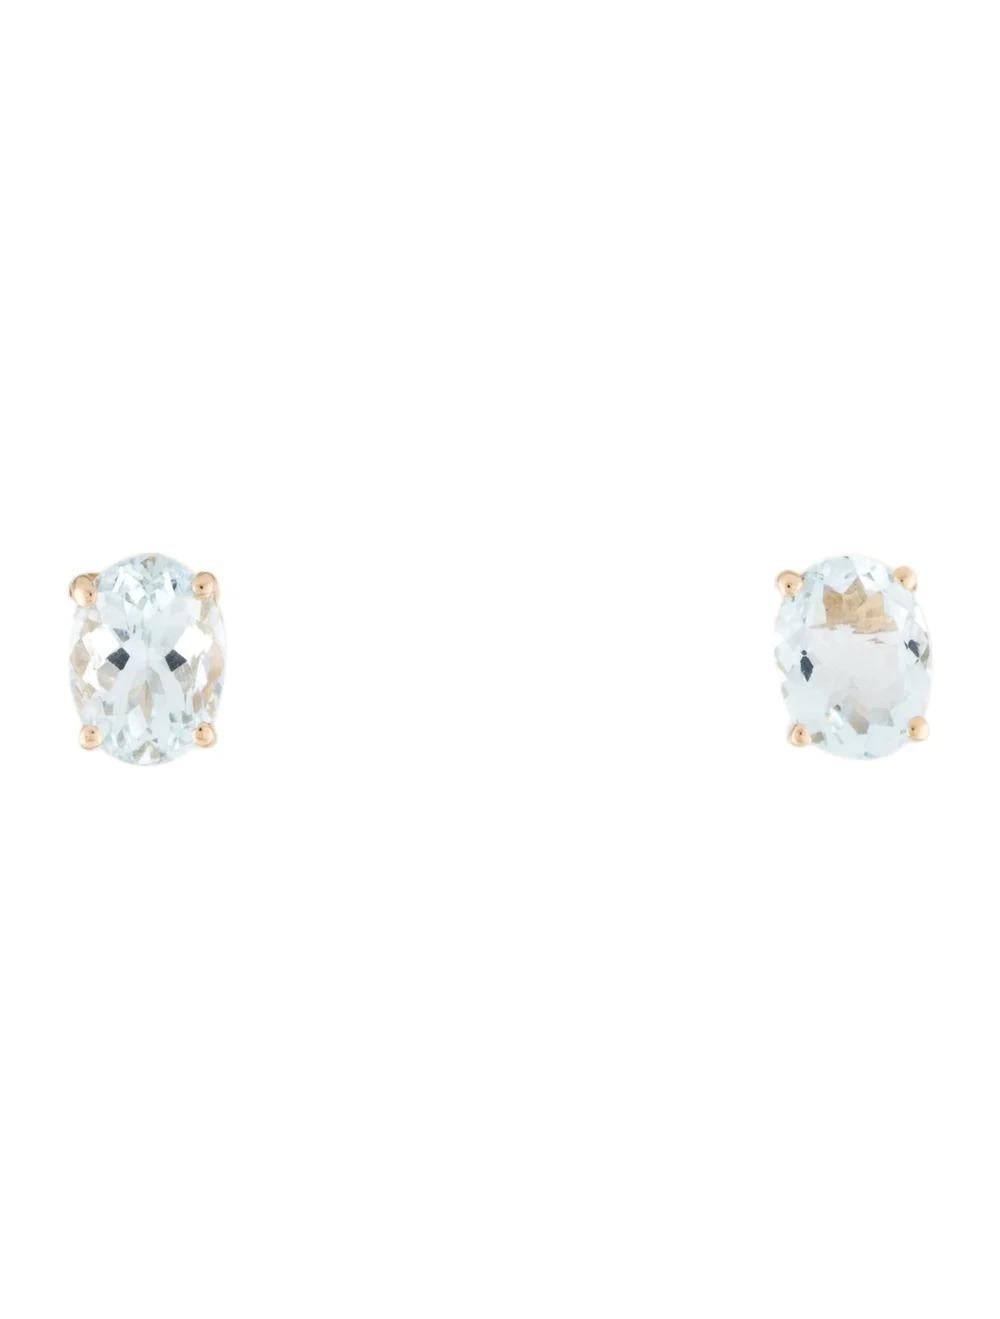 Immerse yourself in elegance with these exquisite 14K yellow gold stud earrings, adorned with mesmerizing oval aquamarines. These earrings are crafted to perfection, exuding timeless beauty and sophistication.

Specifications:

* Metal Type: 14K